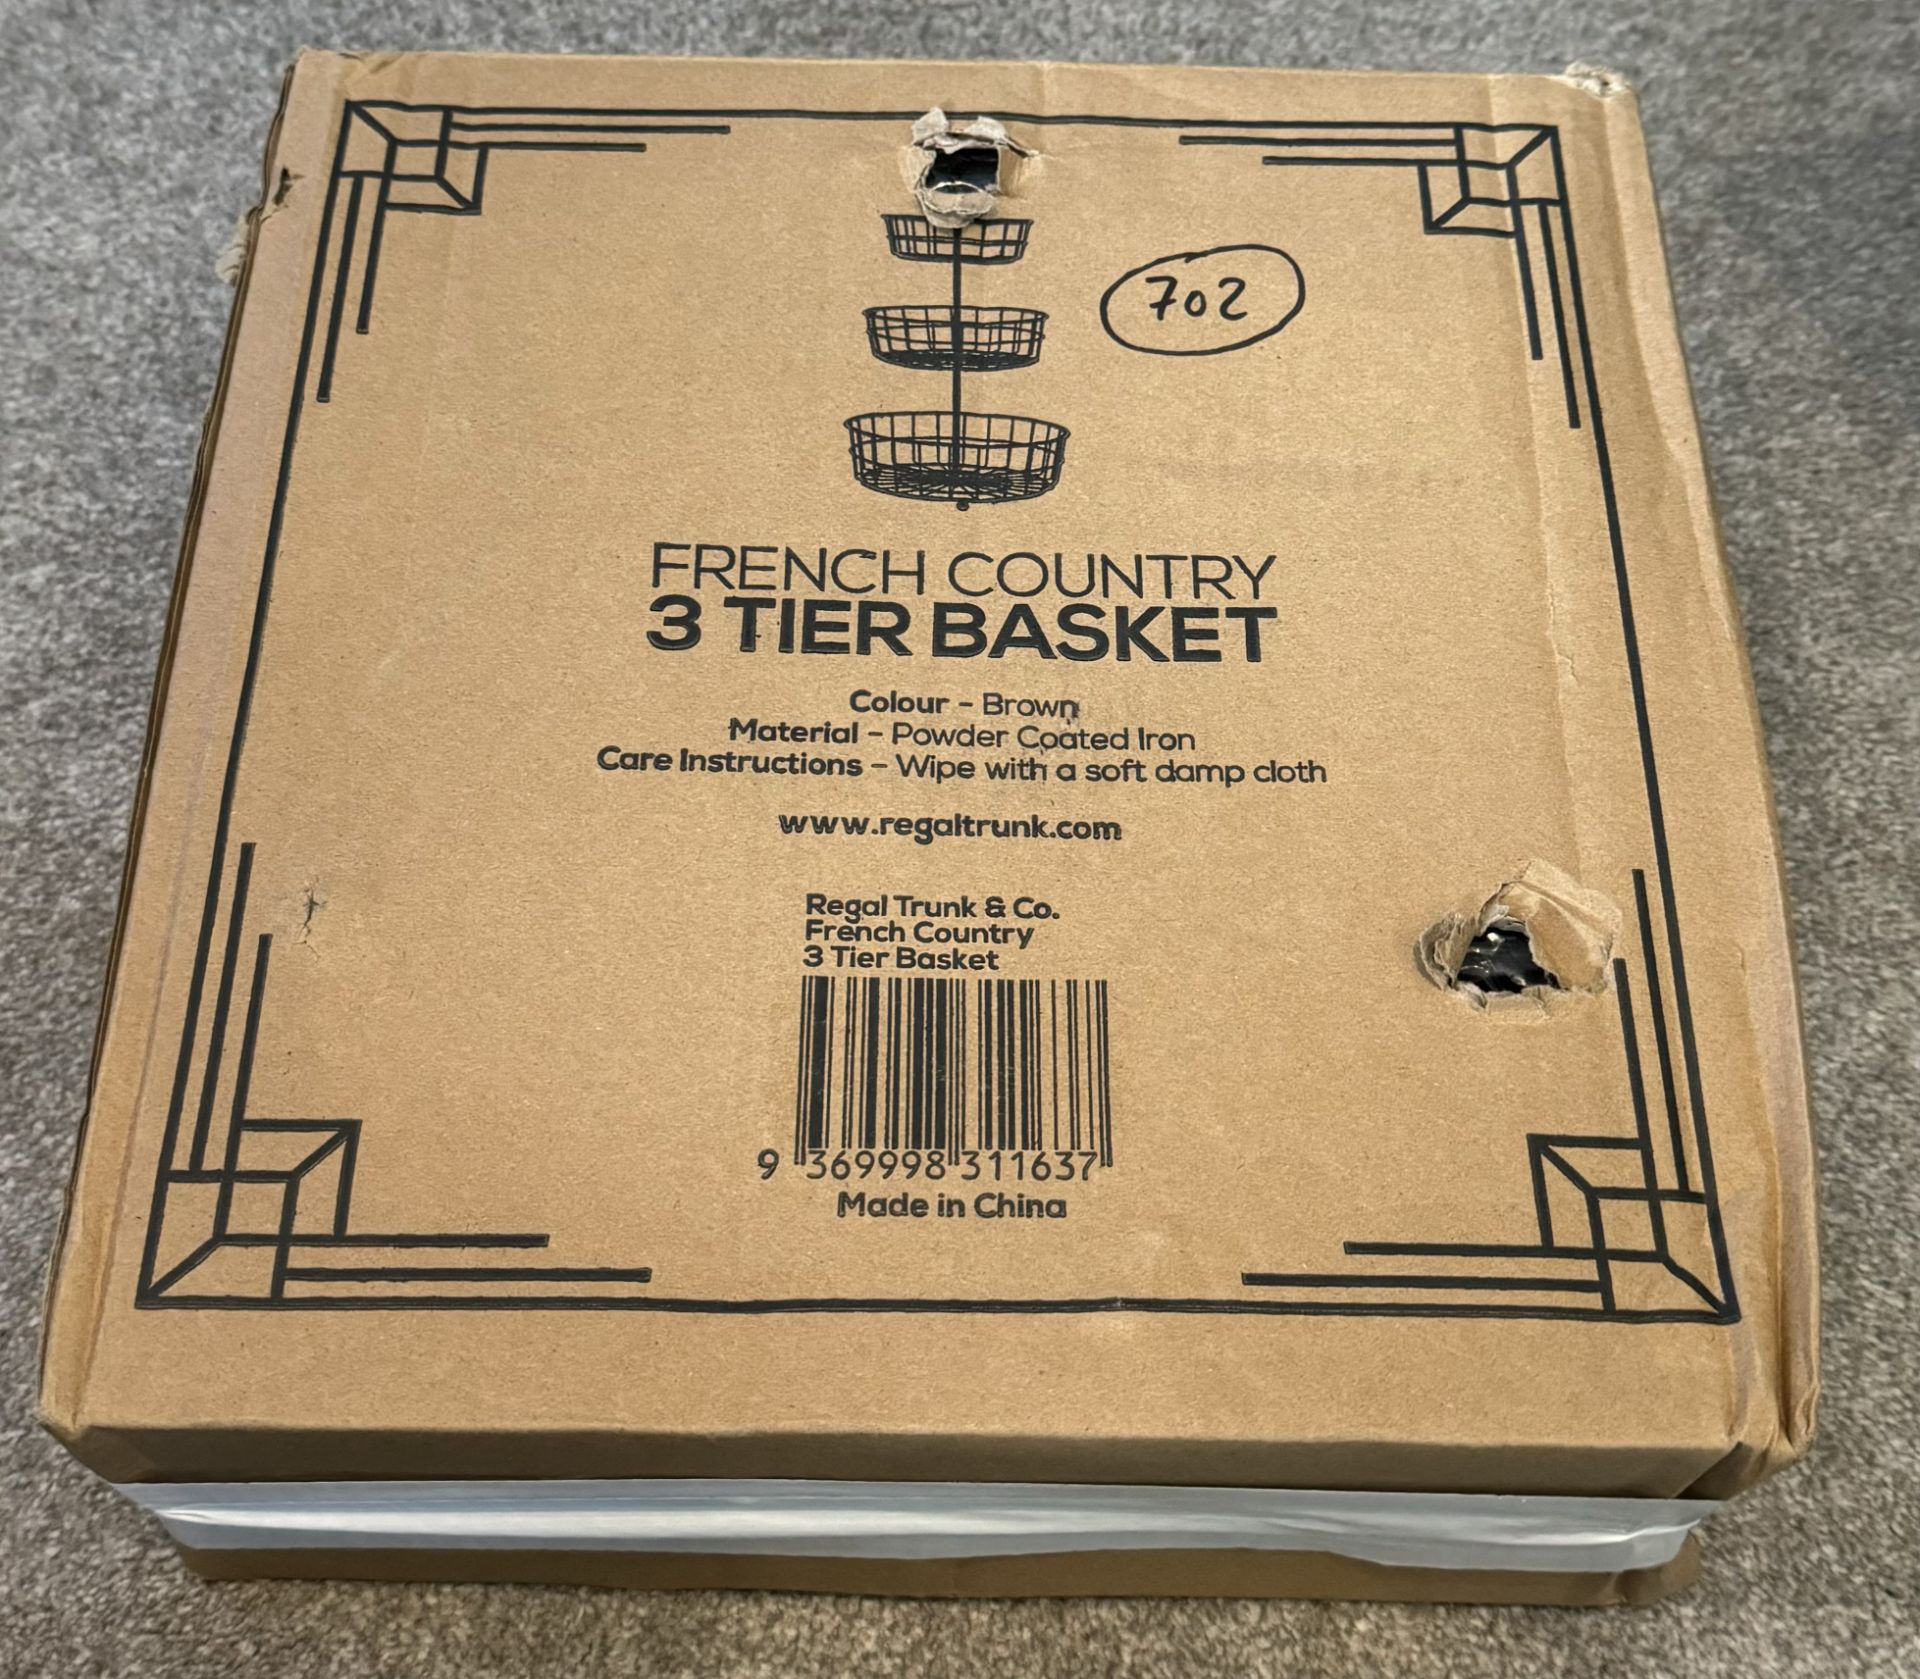 RAW RETURN - Regal Trunk & Co 3 Tier Country Basket - Image 2 of 2